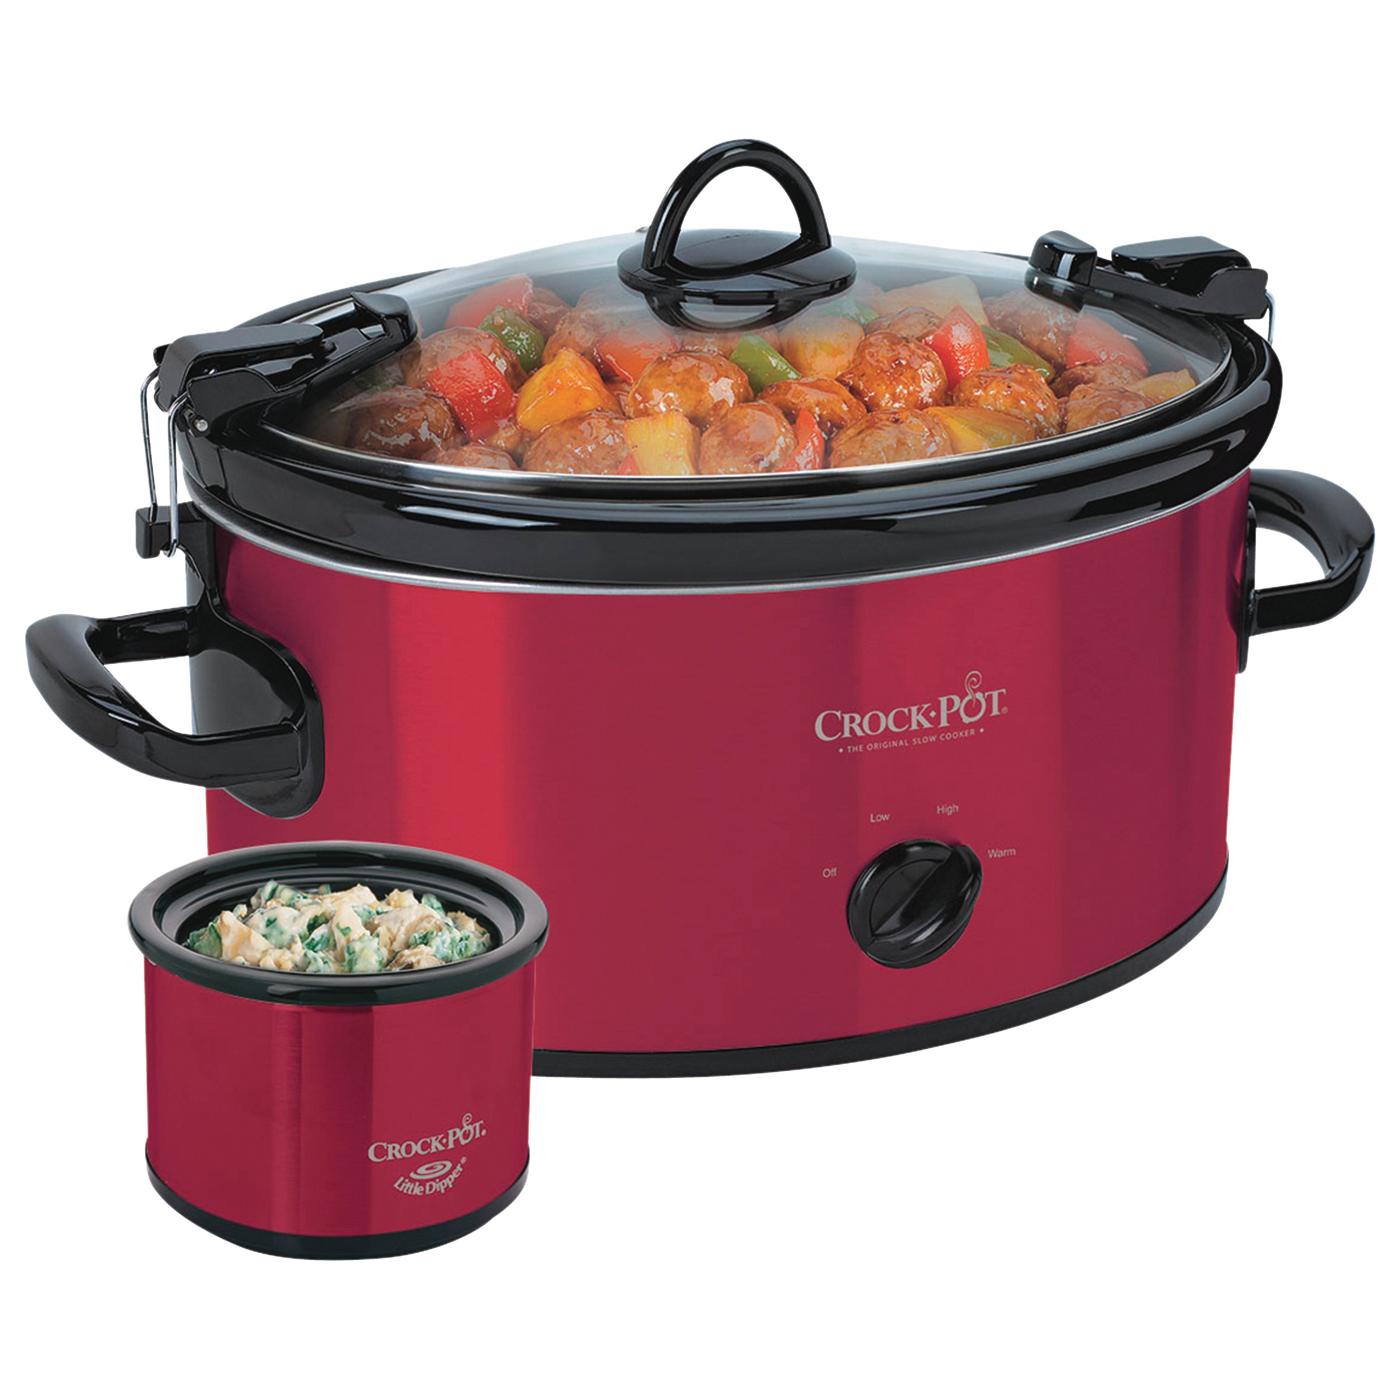 Crock-Pot Red Cook & Carry Slow Cooker Set with Warmer